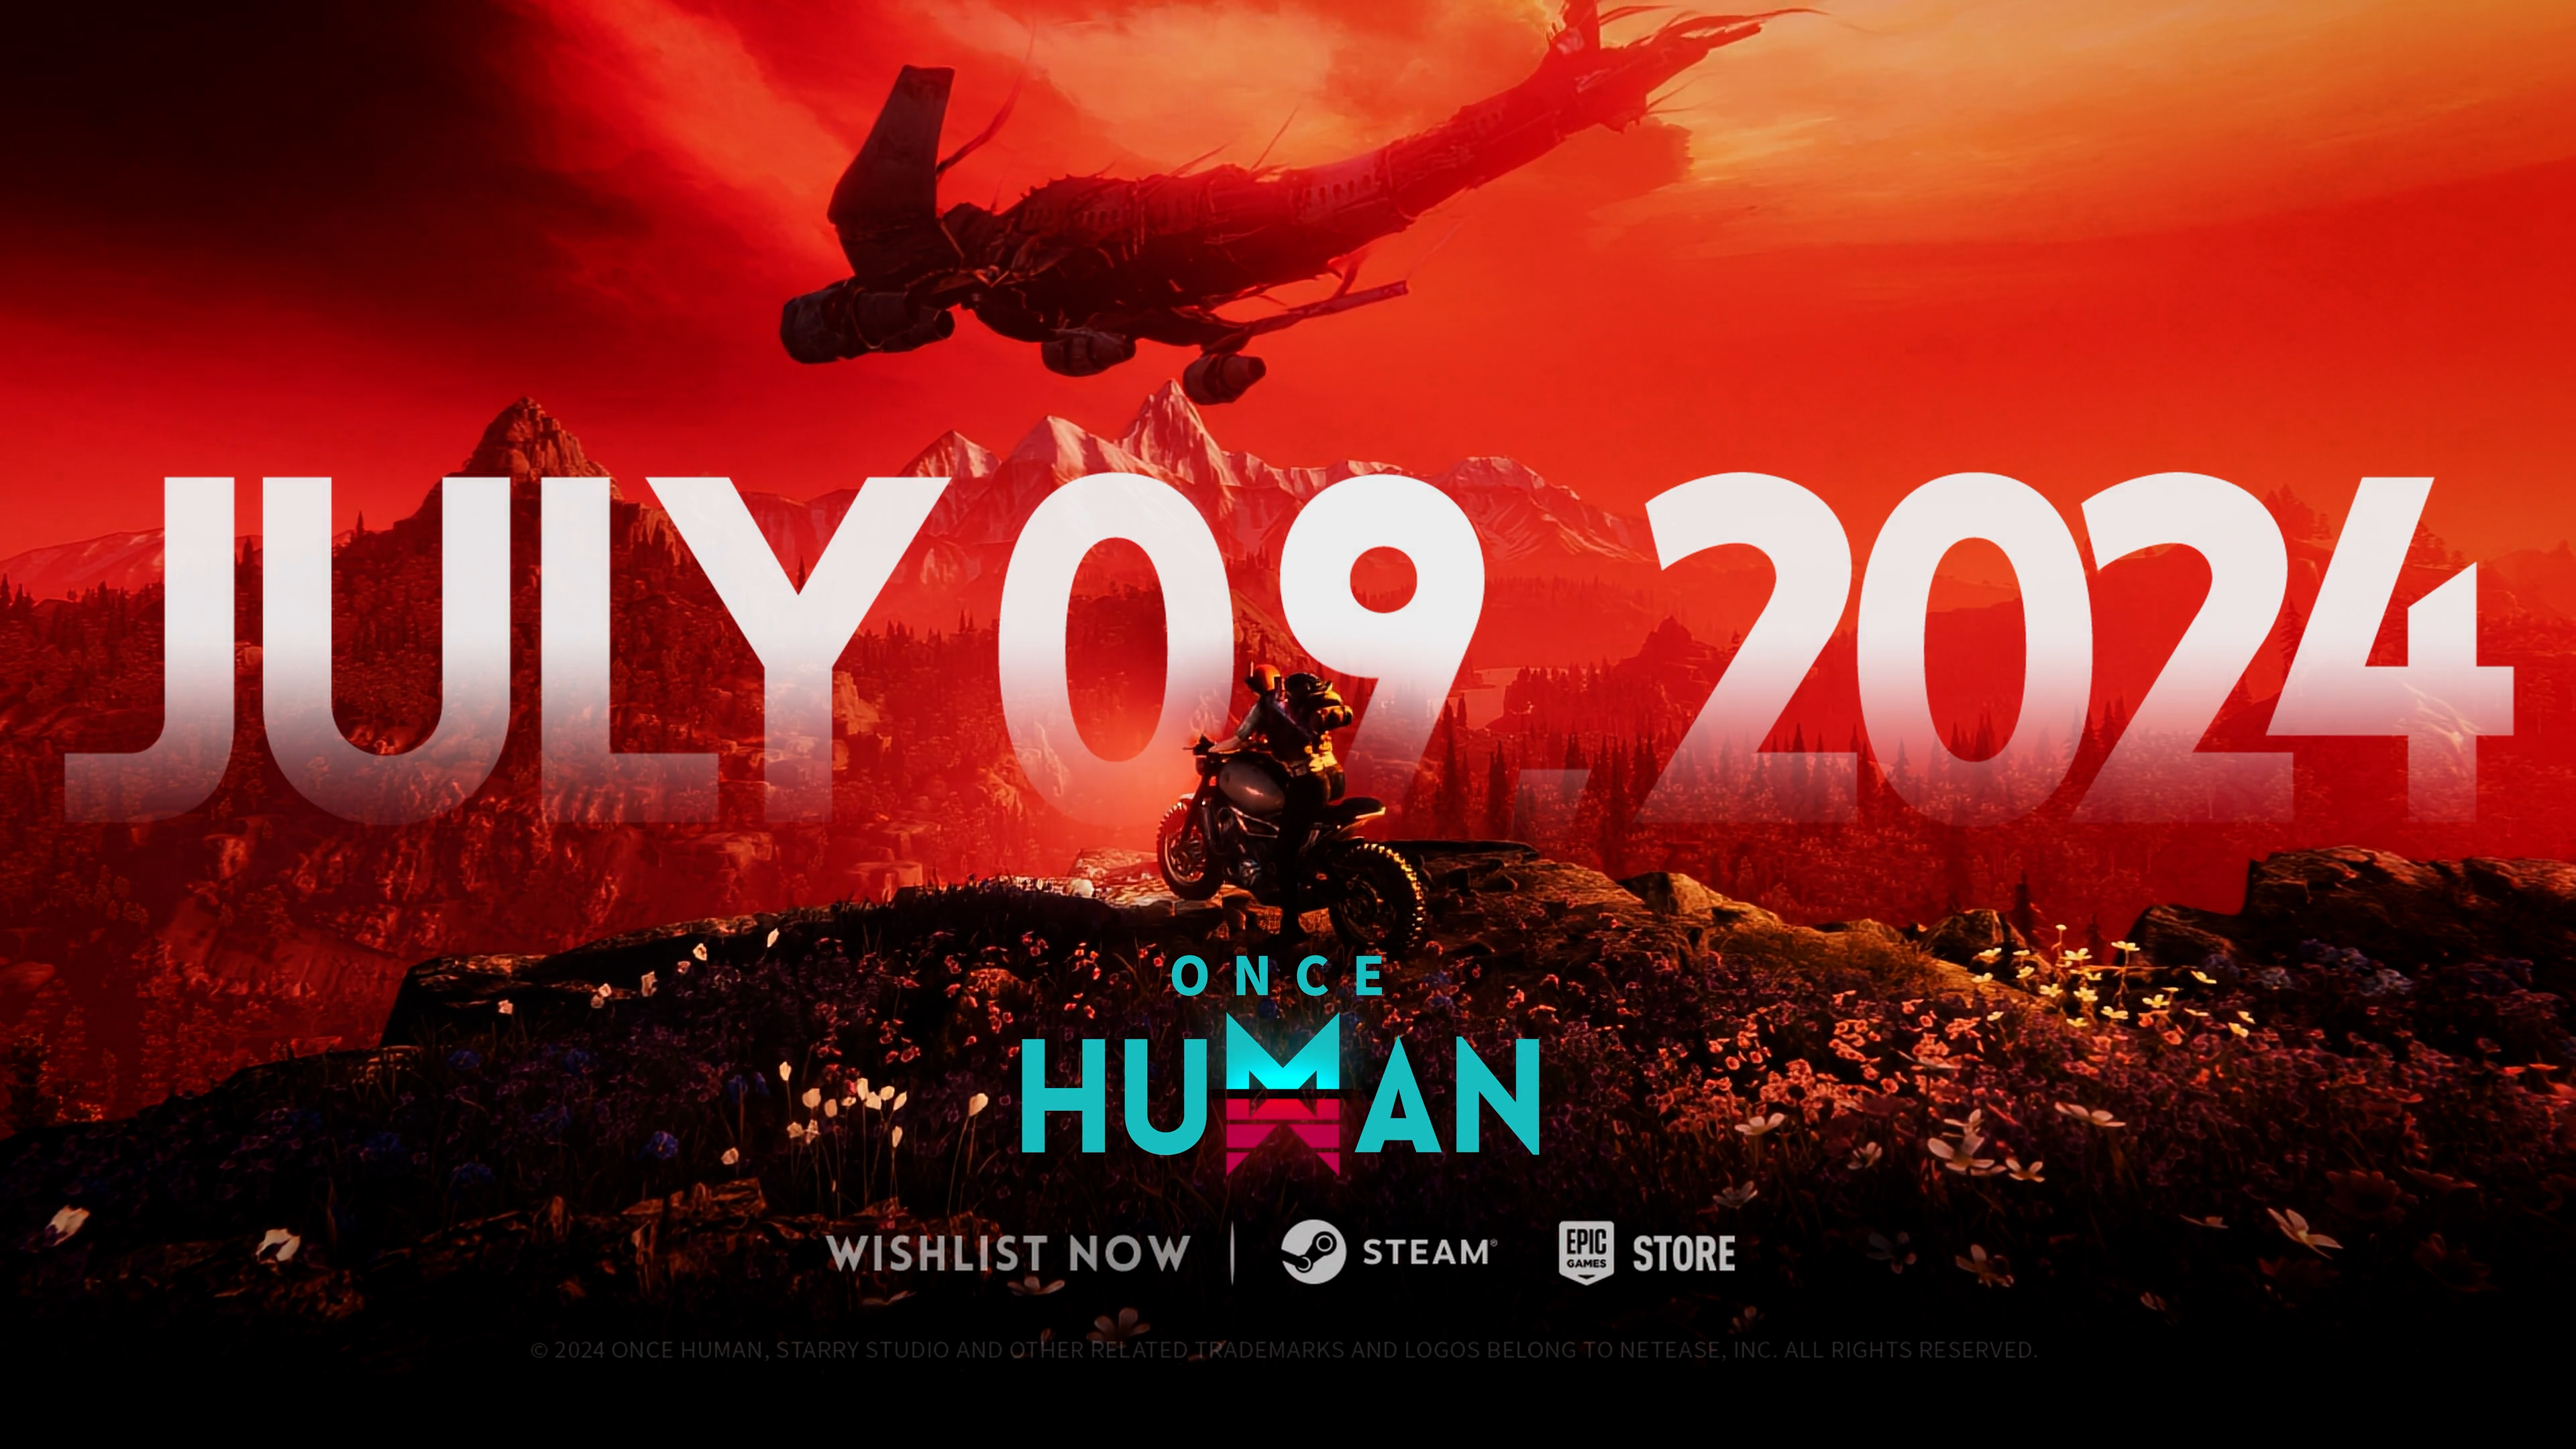 Once Human Release Date Set for July 9